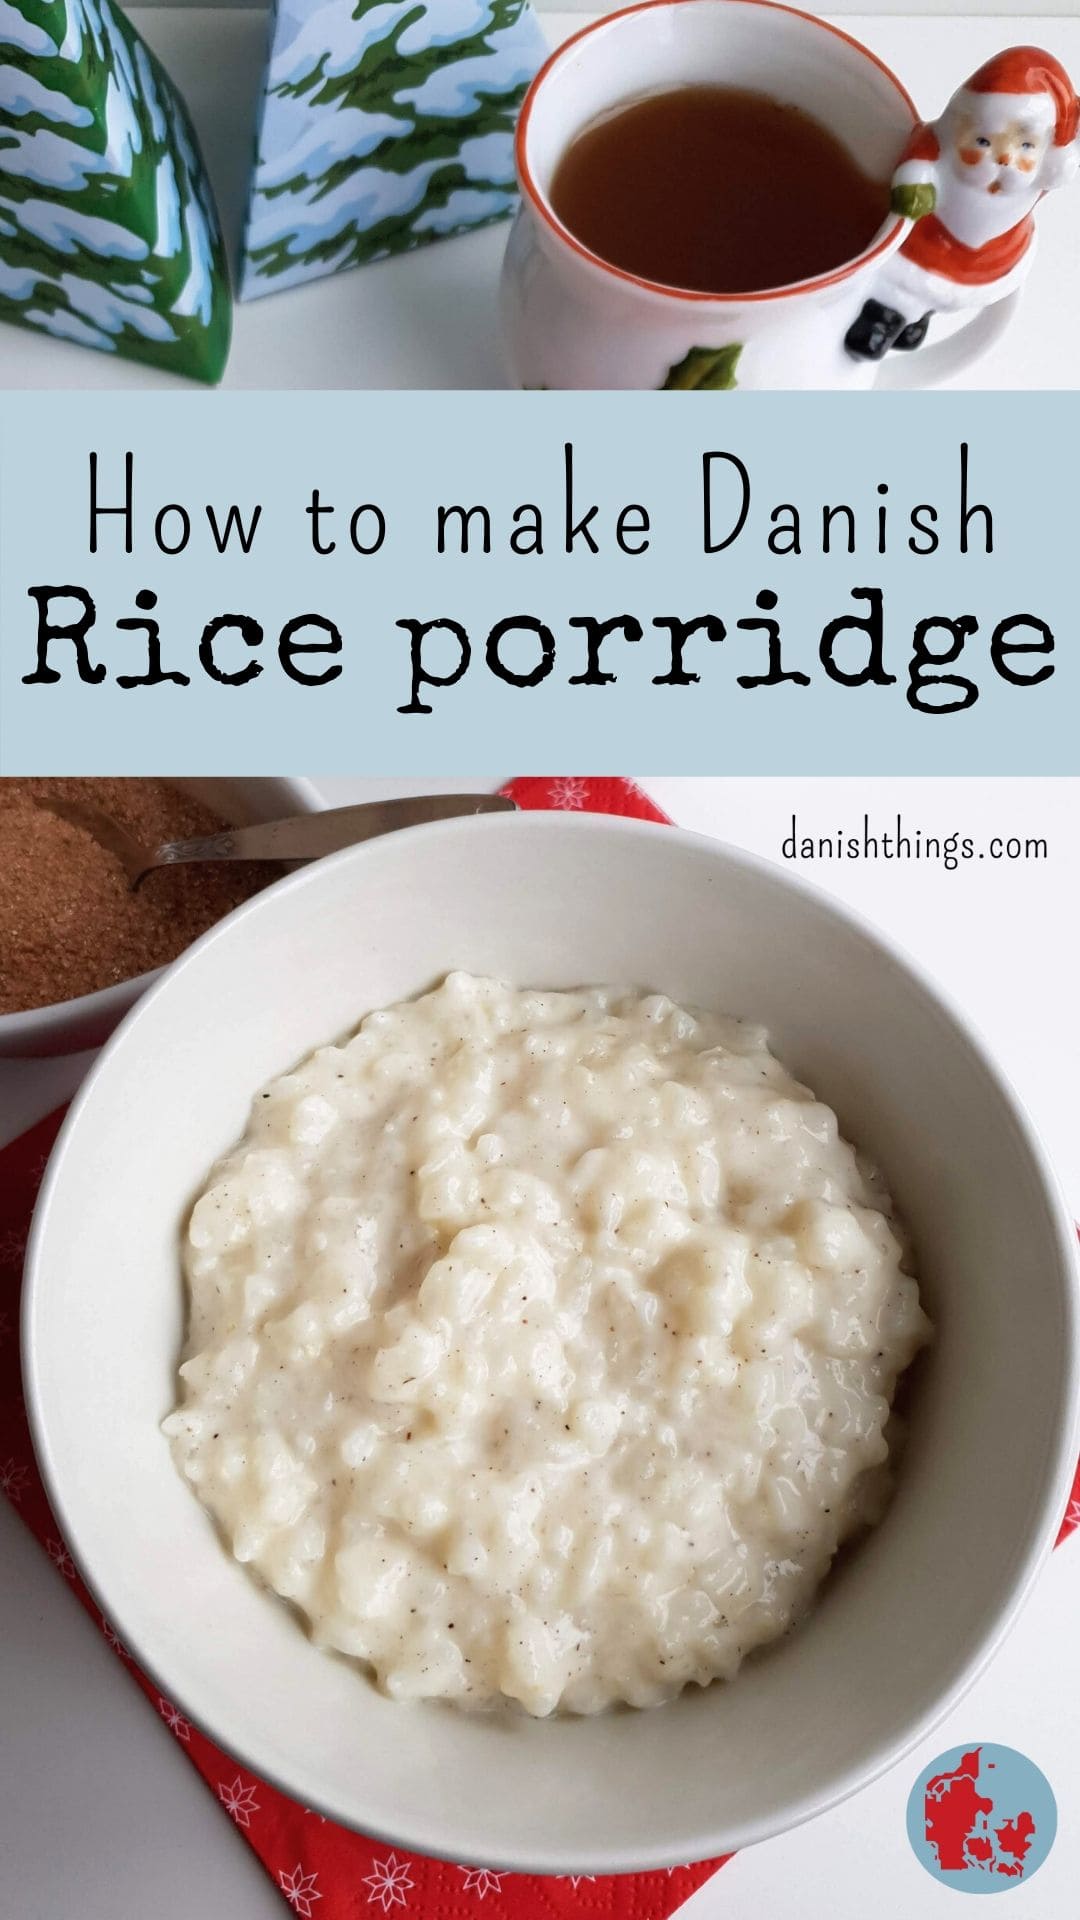 Rice porridge - how to make Danish rice porridge easily in the microwave. Make a delicious rice porridge, eat it for breakfast or dinner, or use it in rice puddings or rice pancakes. Find recipes, free print, and inspiration @ danishthings.com 